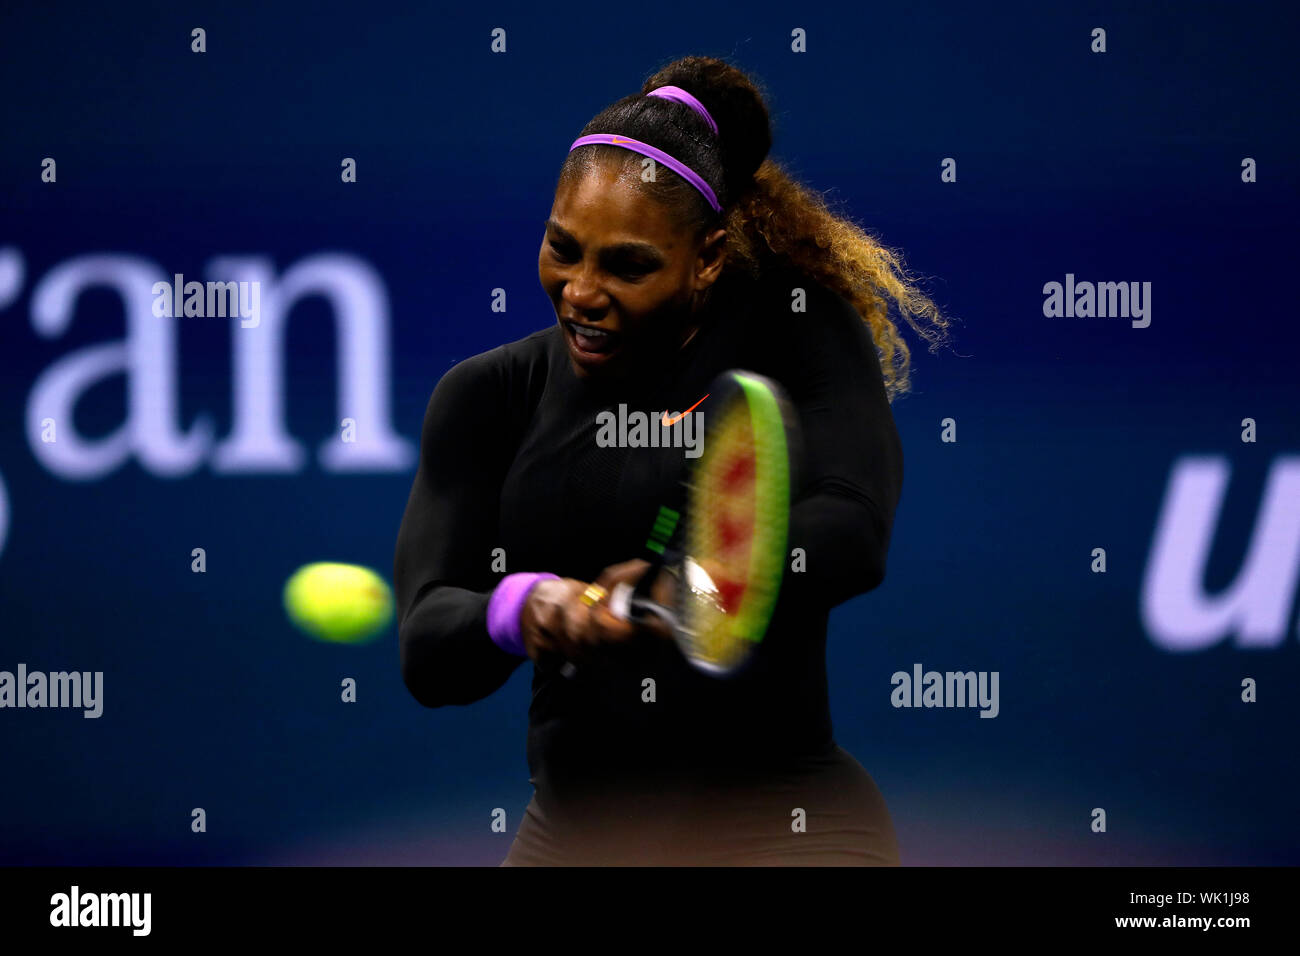 Flushing Meadows, New York, United States - 3 September 2019. Serena Williams strikes a backhand to Wang Qiang of China during their quarter final match at the US Open in Flushing Meadows, New York.   Williams won the match to record her 100th US Open match victory. Credit: Adam Stoltman/Alamy Live News Stock Photo